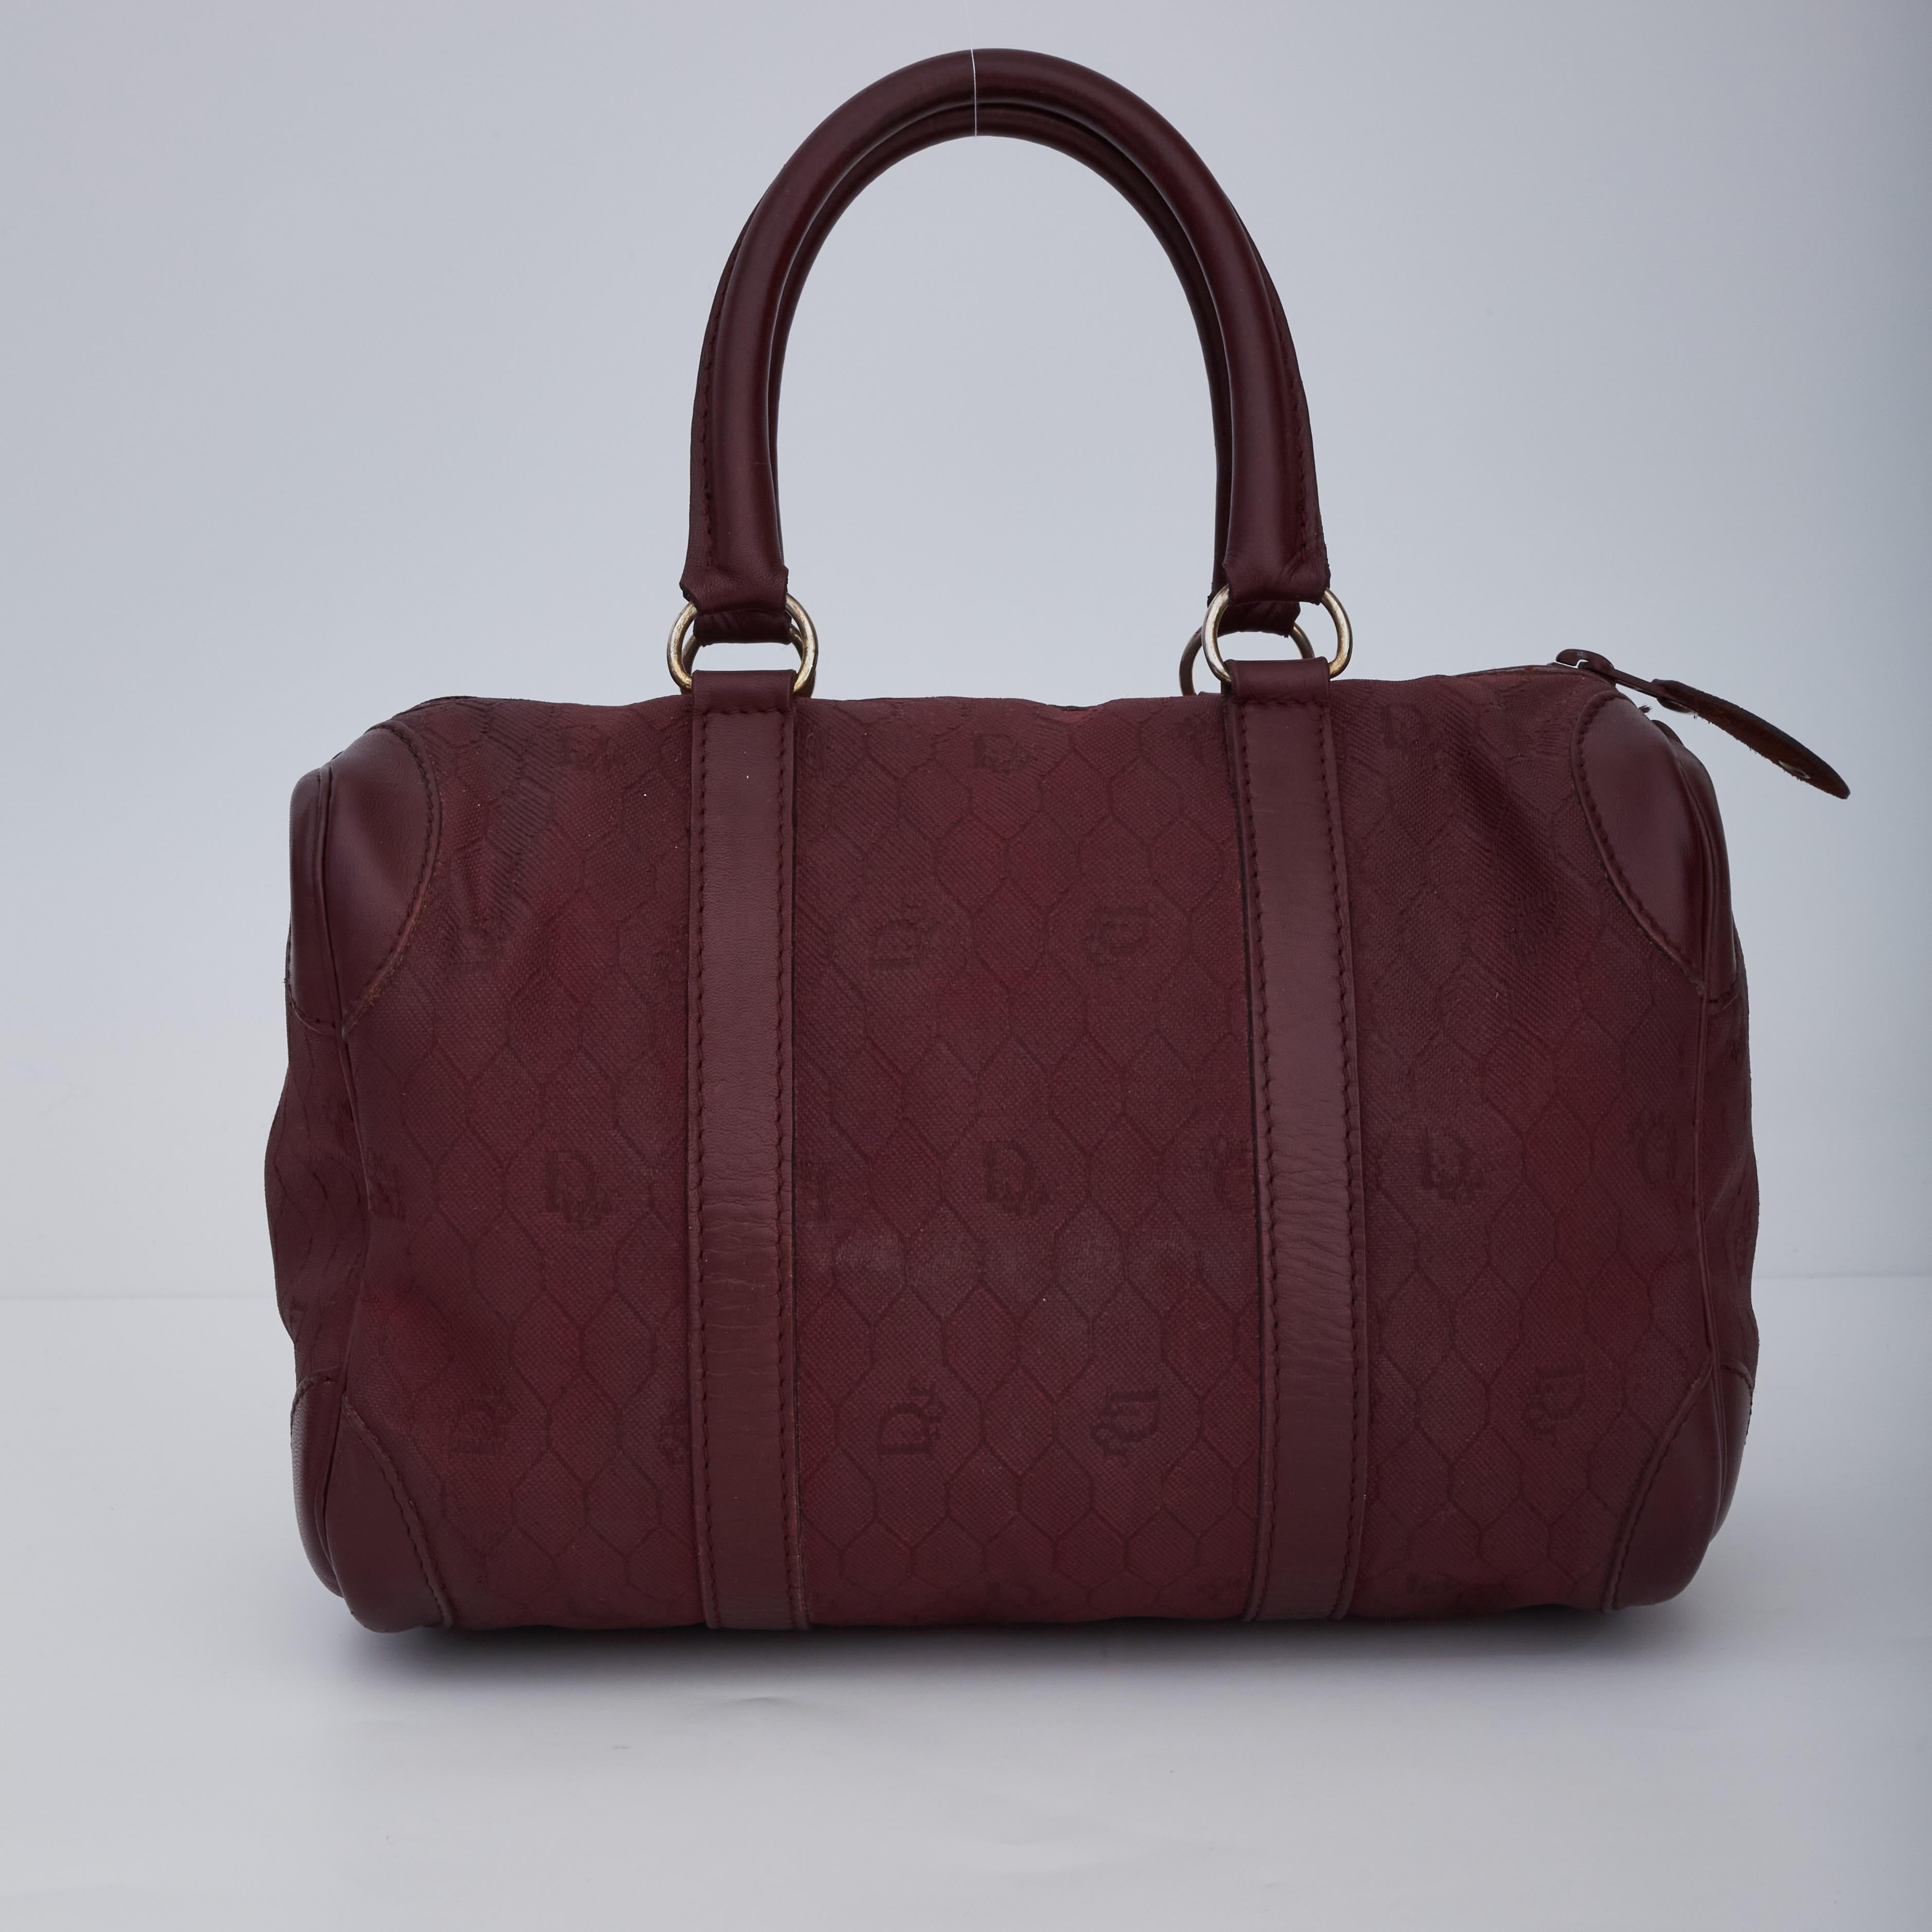 COLOR: Burgundy
MATERIAL: Canvas
MEASURES: H 7” x W 10” x D 6”
DROP: 5”
CONDITION: Very good - faint hairline marks, darkening to rolled leather handles, bag was refurbished and dyed professionally.

Made in France